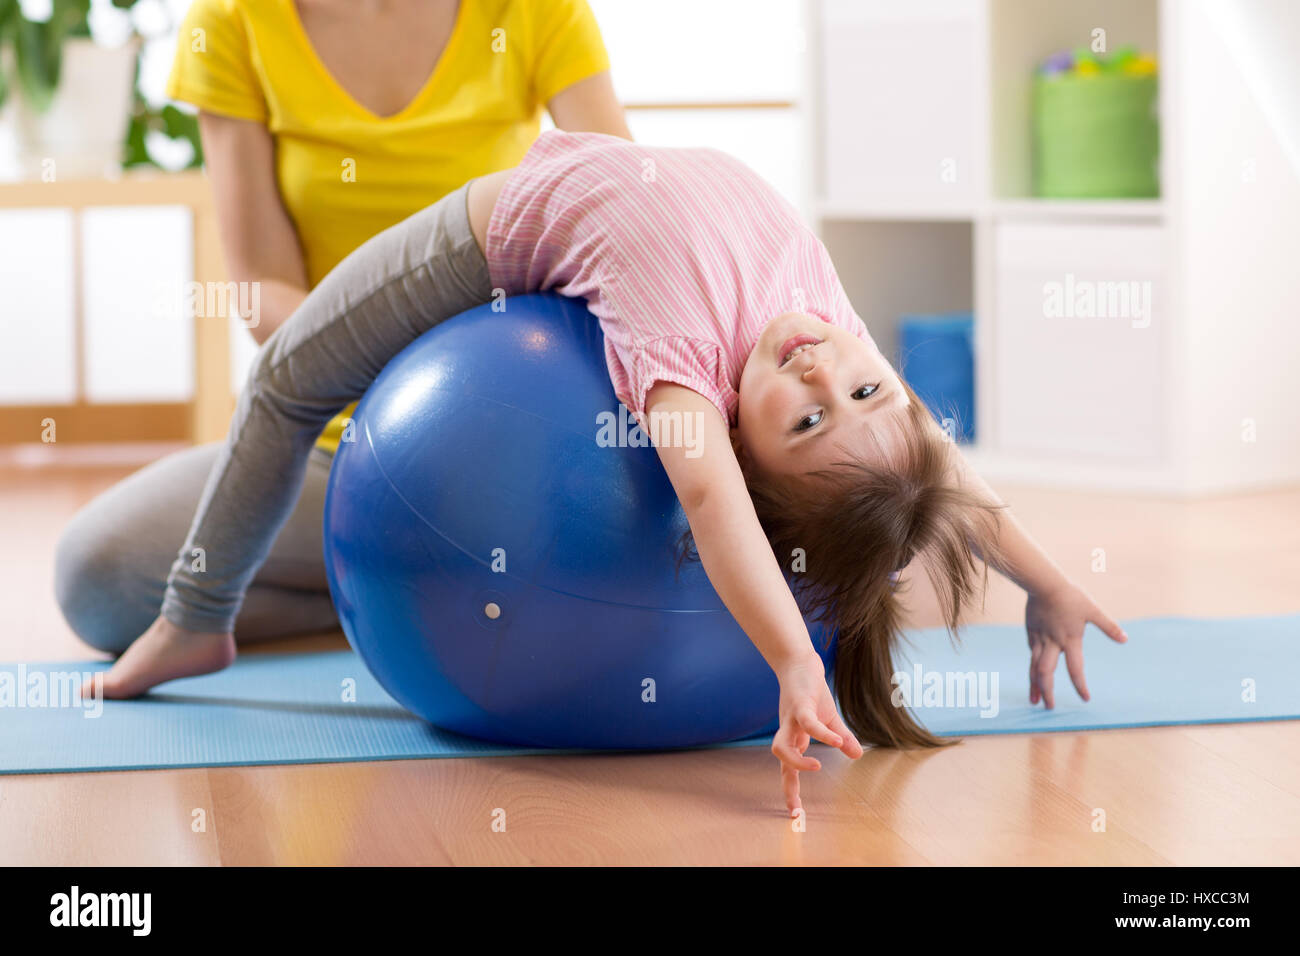 Cute child girl stretching on pilates fitness ball in gym Stock Photo